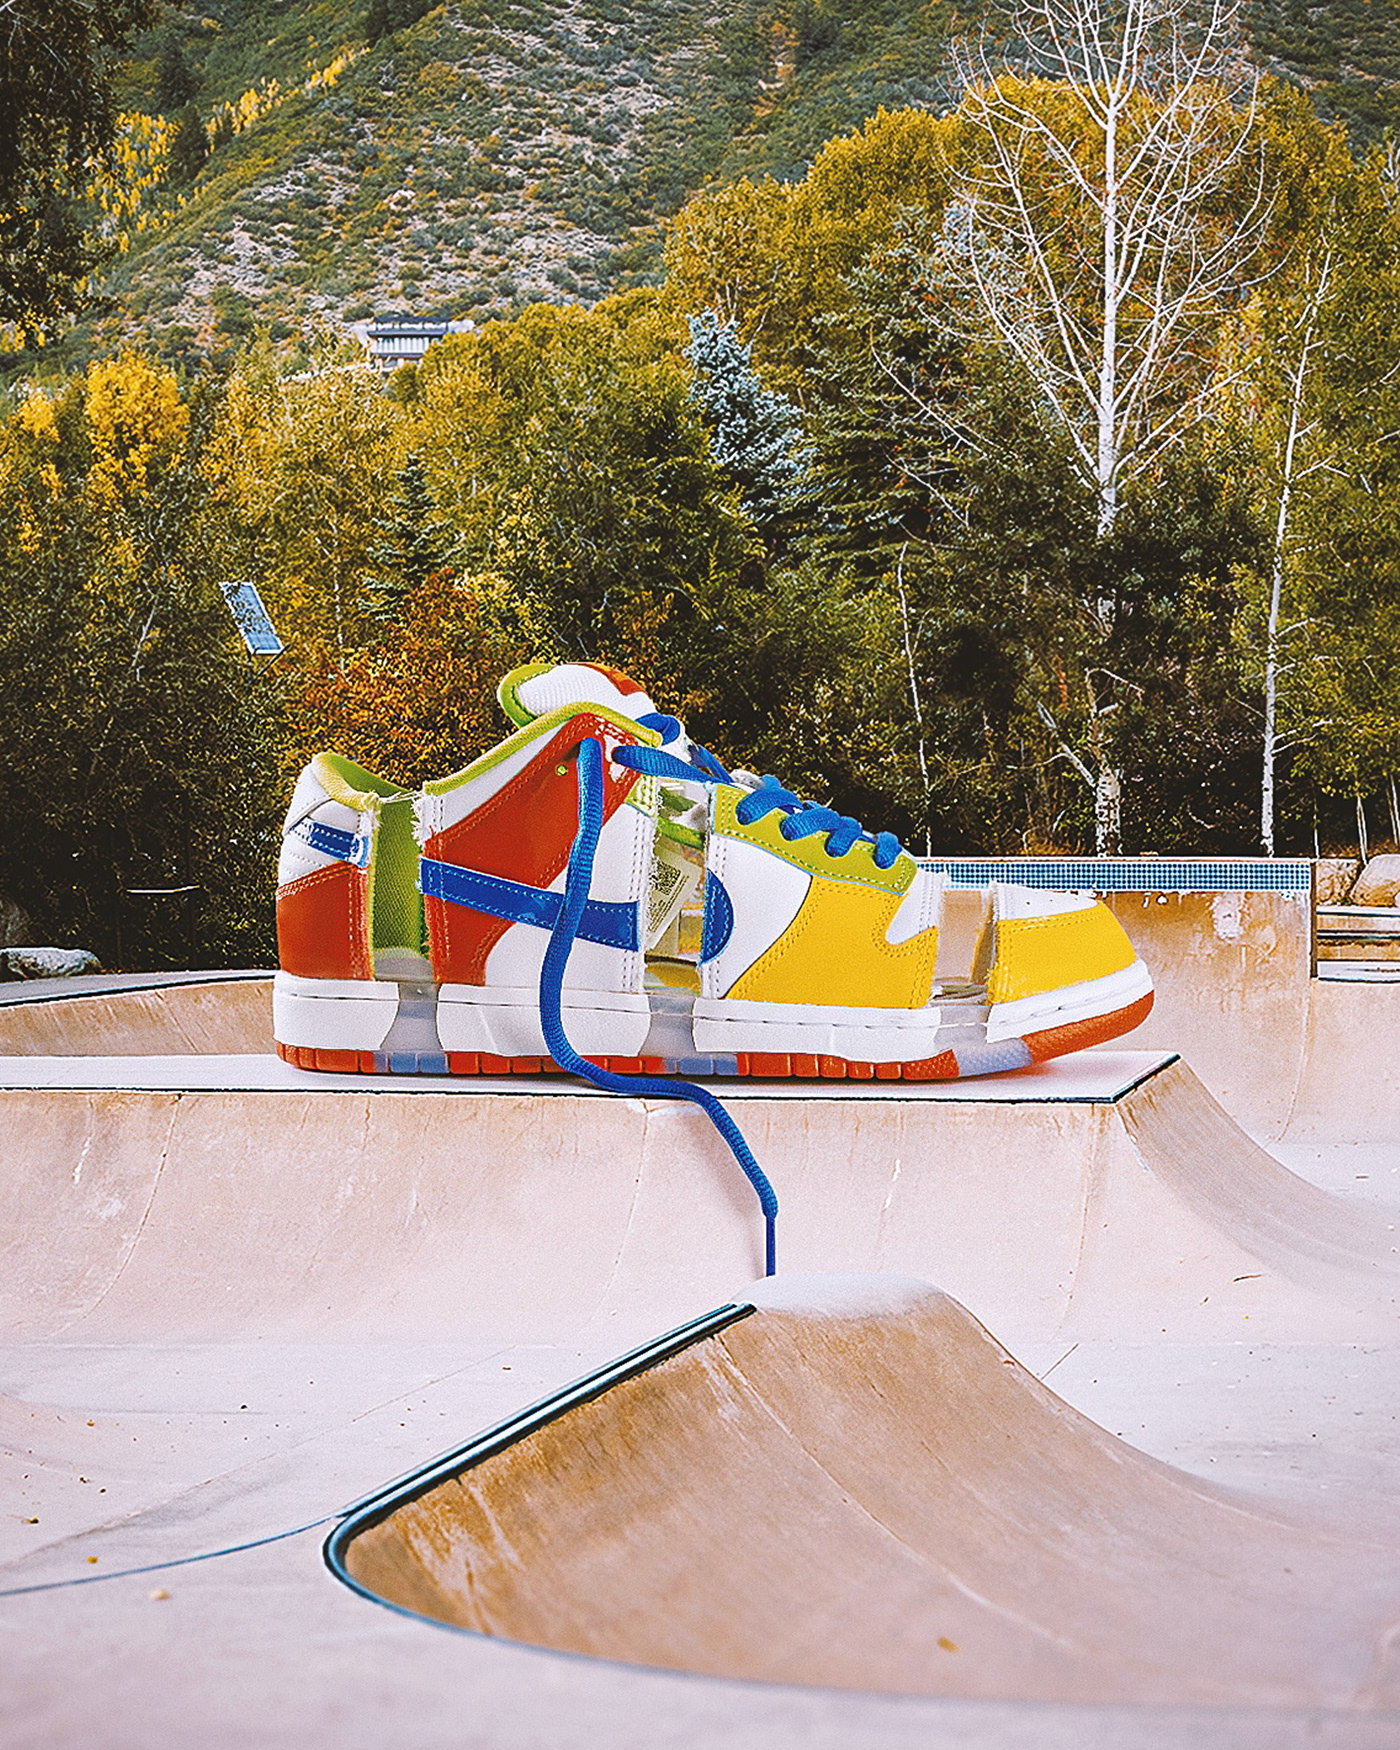 Giant sneaker photo composite at skate park . Retouching using Photoshop